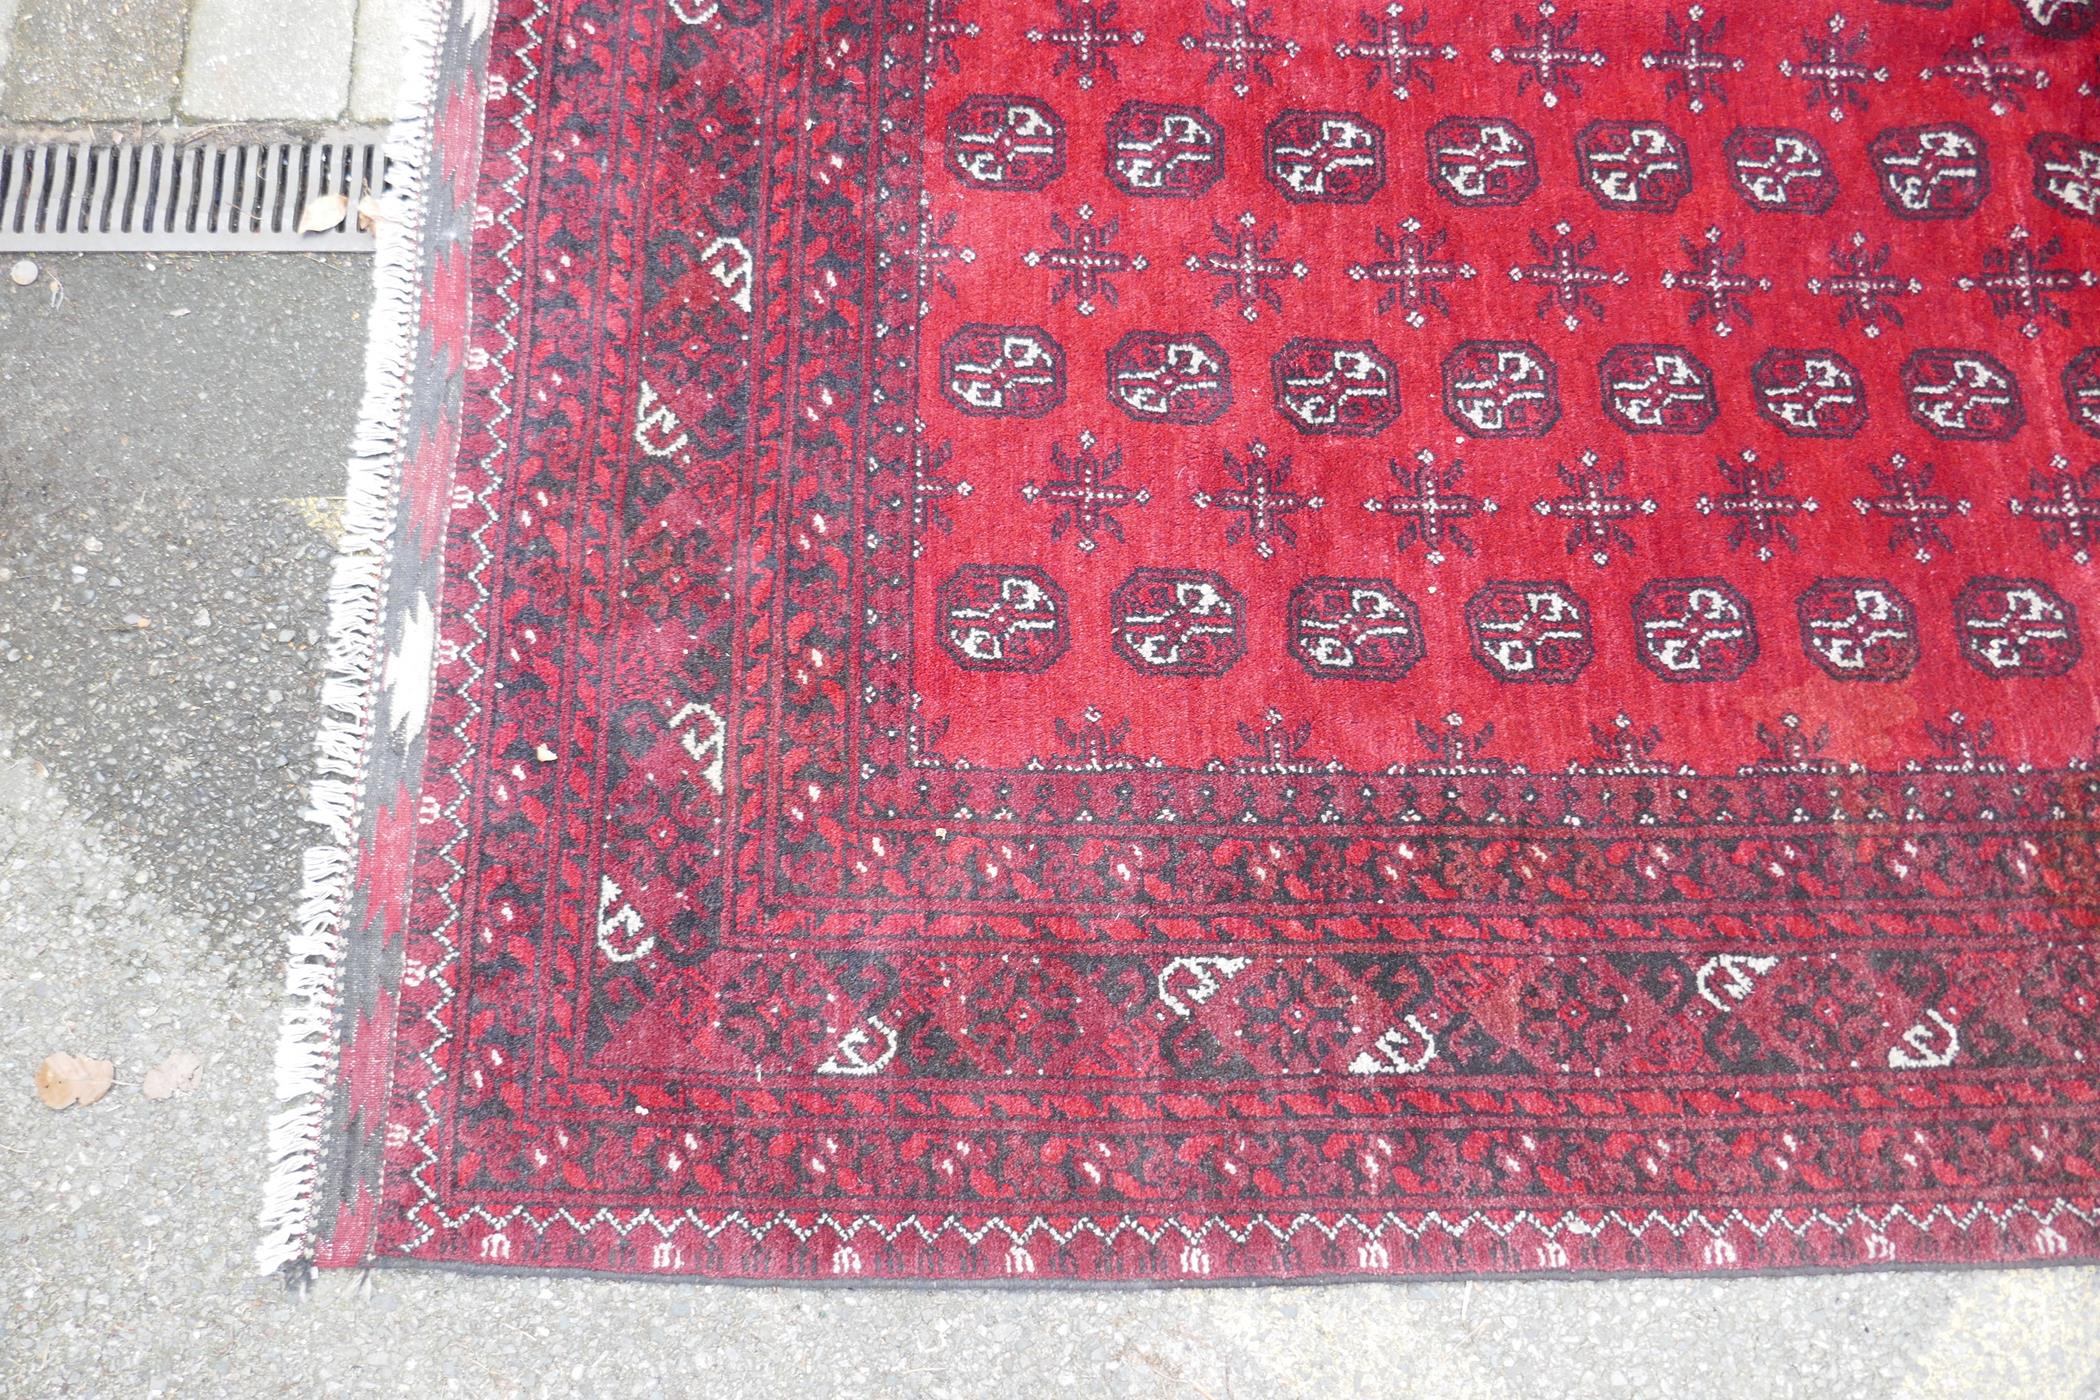 A hand woven wool Bokhara carpet, faded one end, 200 x 300cm - Image 4 of 7